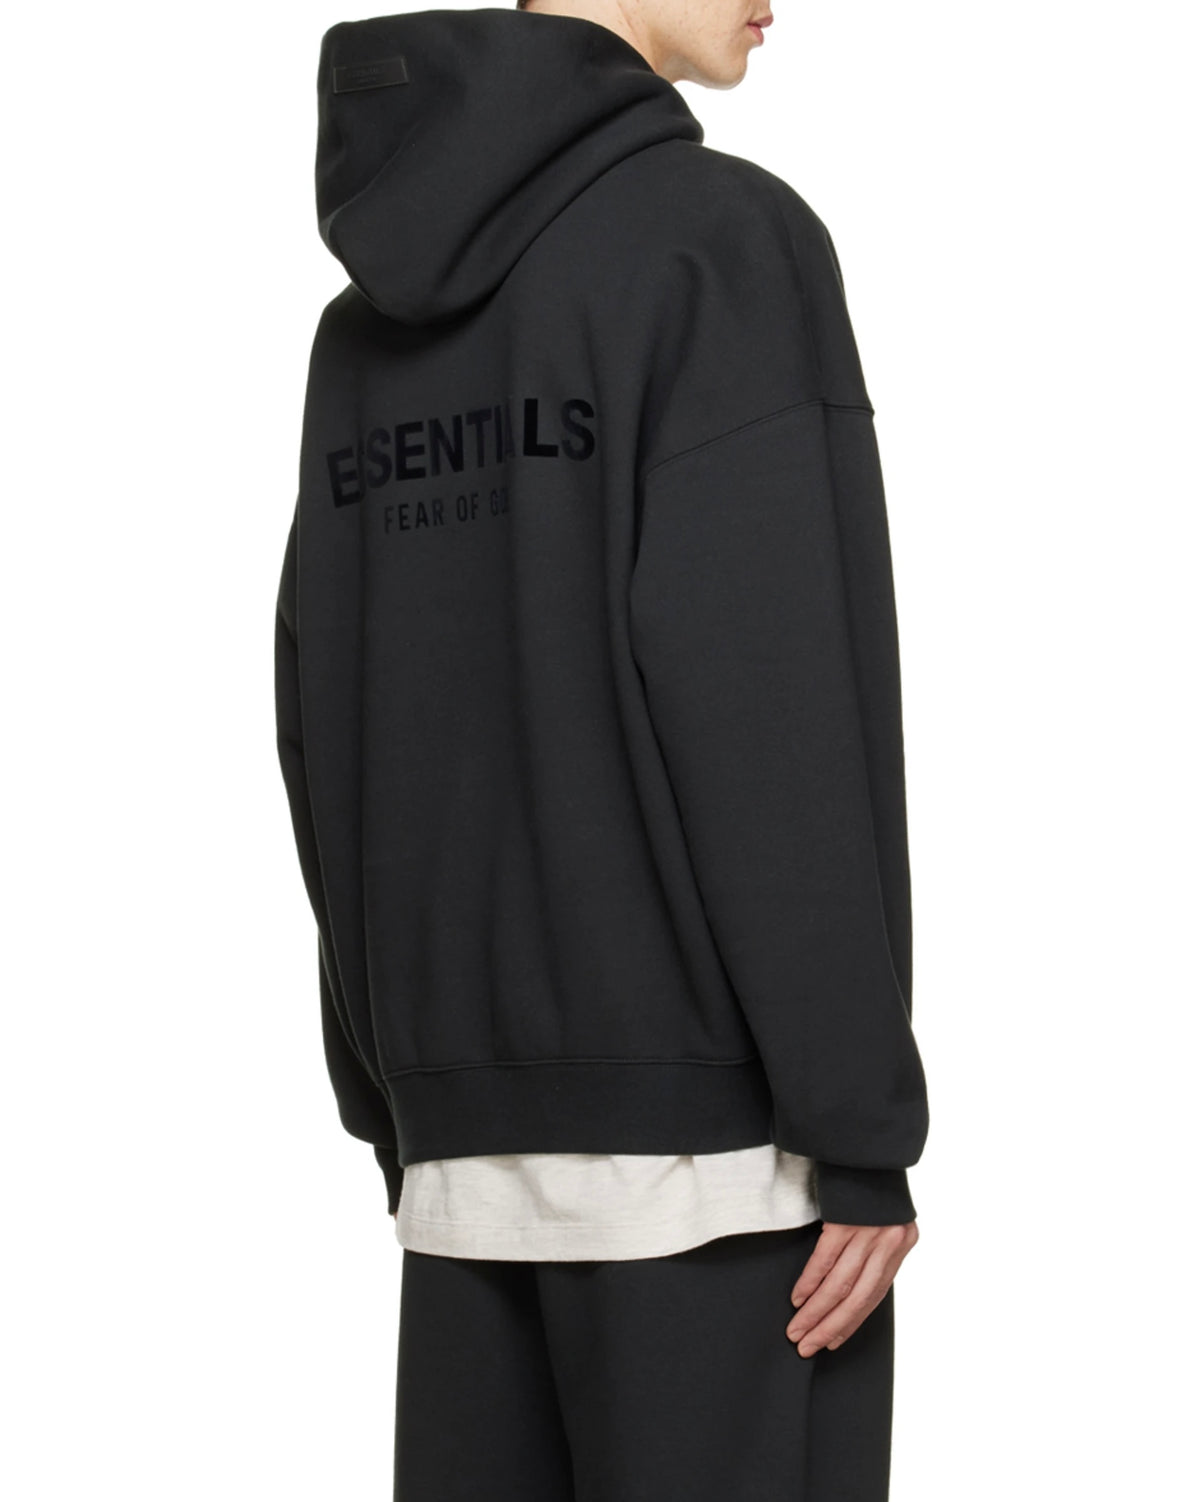 Fear Of God Essentials Tracksuit SS22 “Black”